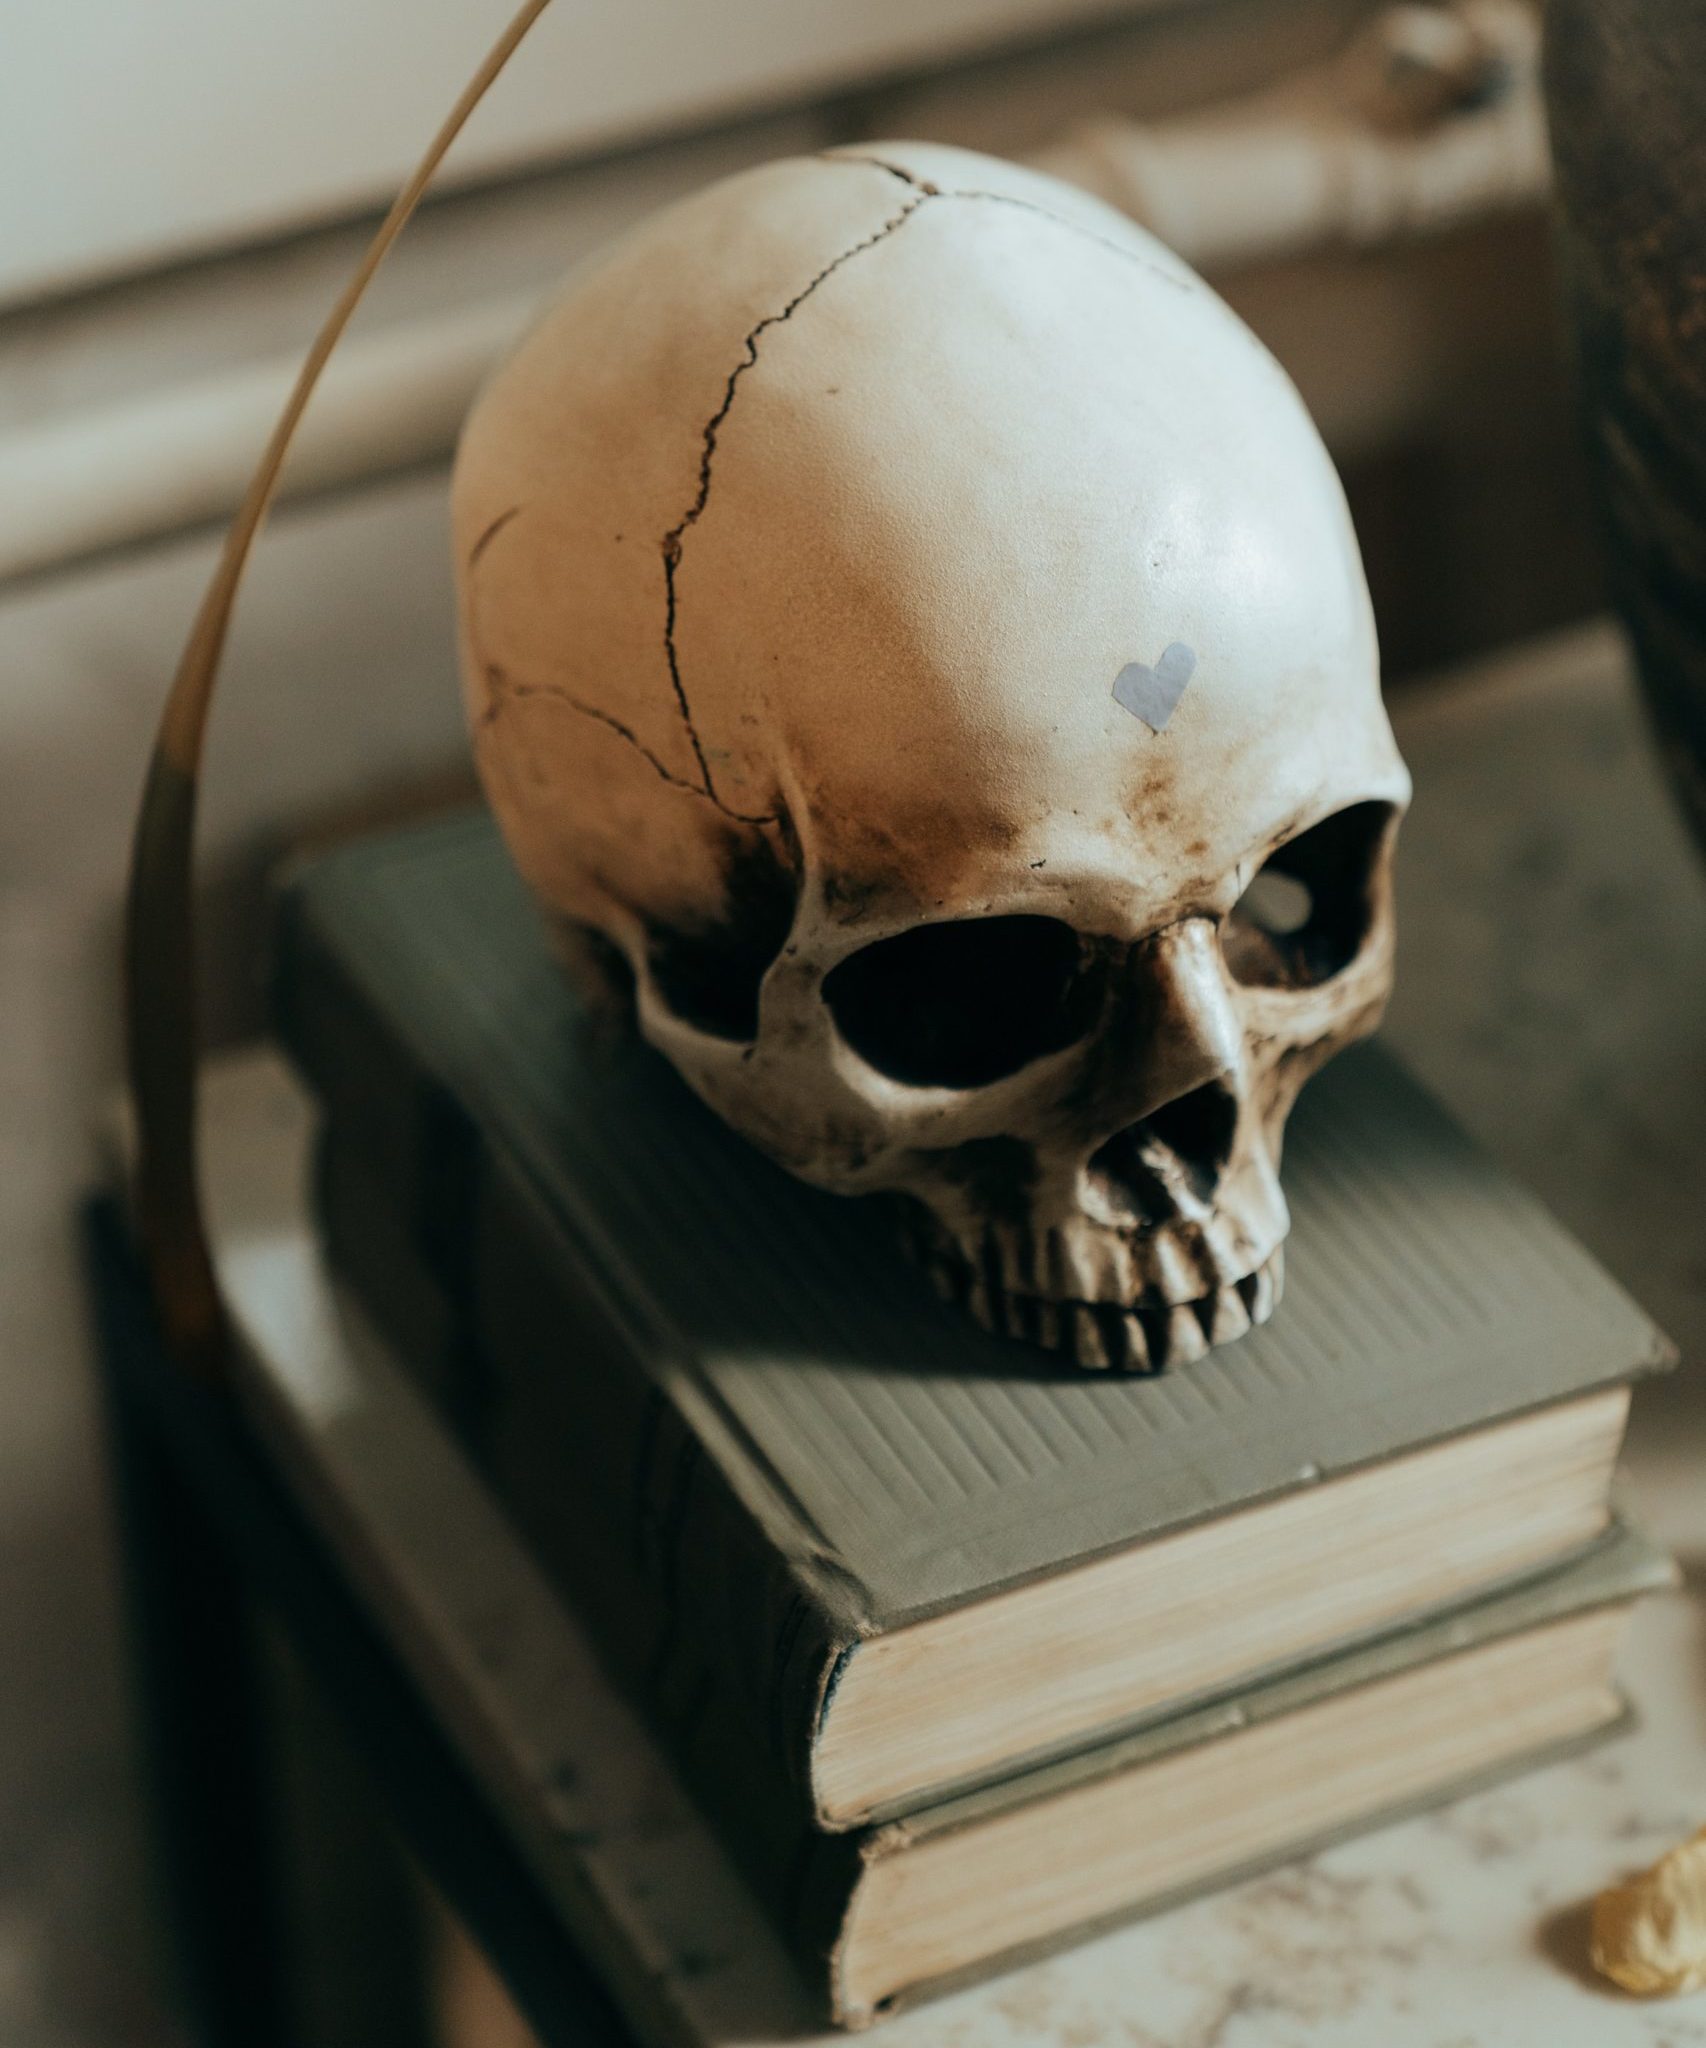 Skull with a heart on the forehead on a stack of books.